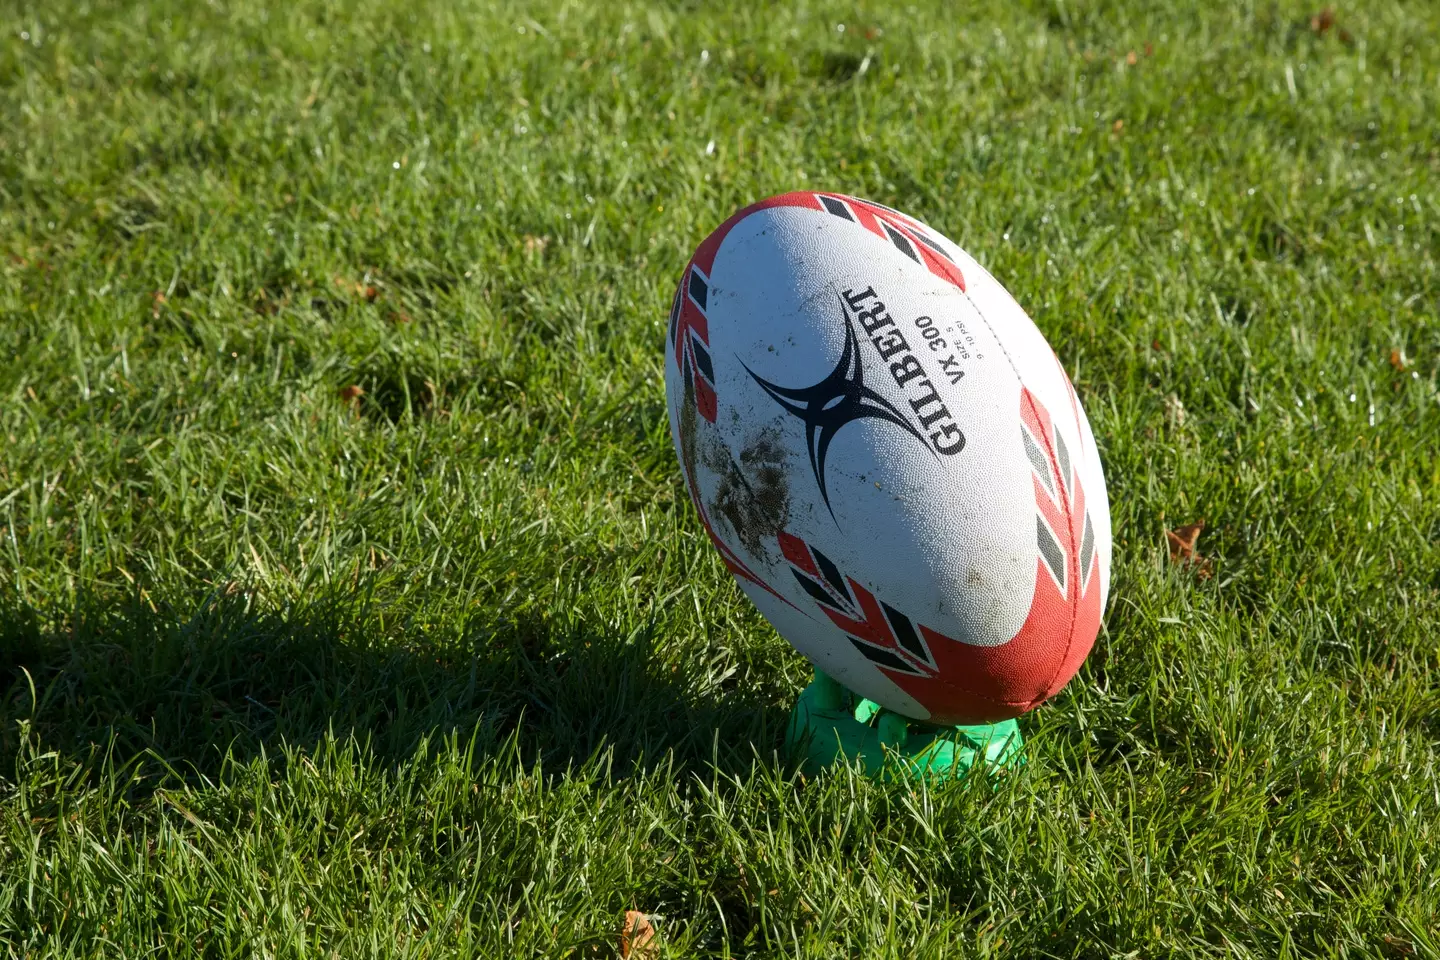 The RFU currently allows some transgender women to play women’s rugby on a case-by-case basis.